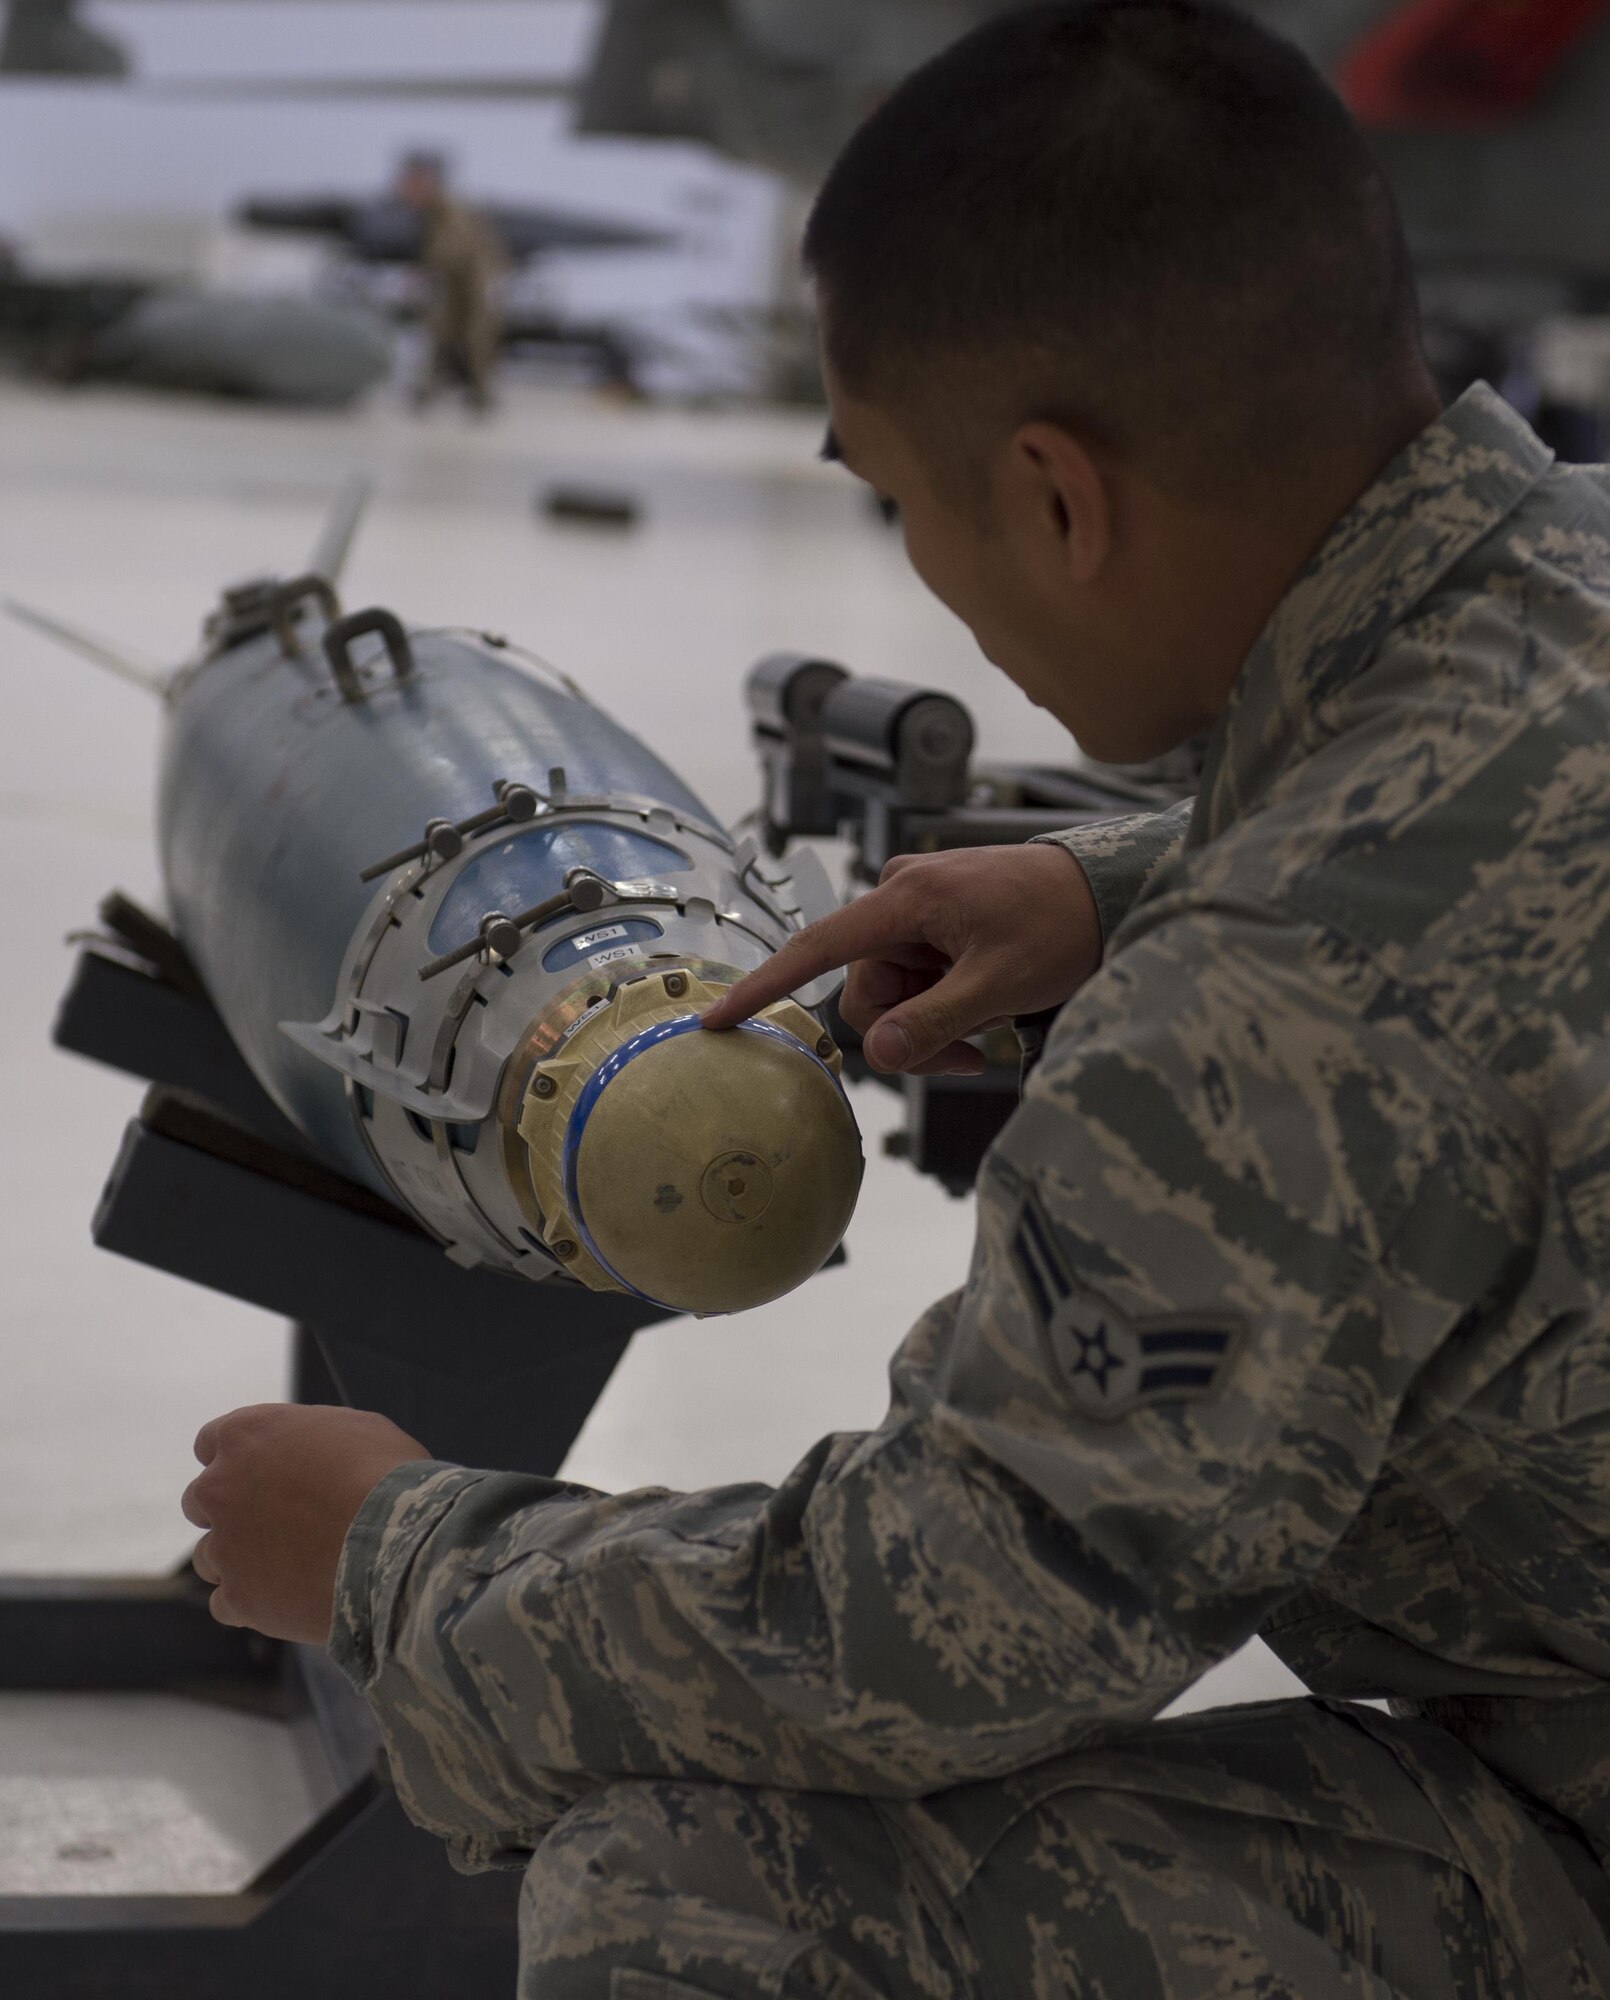 Airman 1st Class Daniel, an MQ-9 Reaper weapons load crew member, inspects an inert munition before loading it onto an MQ-9 during a quarterly load crew competition at Holloman Air Force Base, N.M., Jan. 20, 2016. The weapons load crews for the German Air Force Tornado, F-16 Fighting Falcon and MQ-9 Reaper competed against each other to load weapons the most efficiently and with the least amount of procedural errors. Points for the competition are awarded based on weapons loading, tool kit inspection and uniform inspection categories. (U.S. Air Force photo by Senior Airman Chase Cannon/ Released)